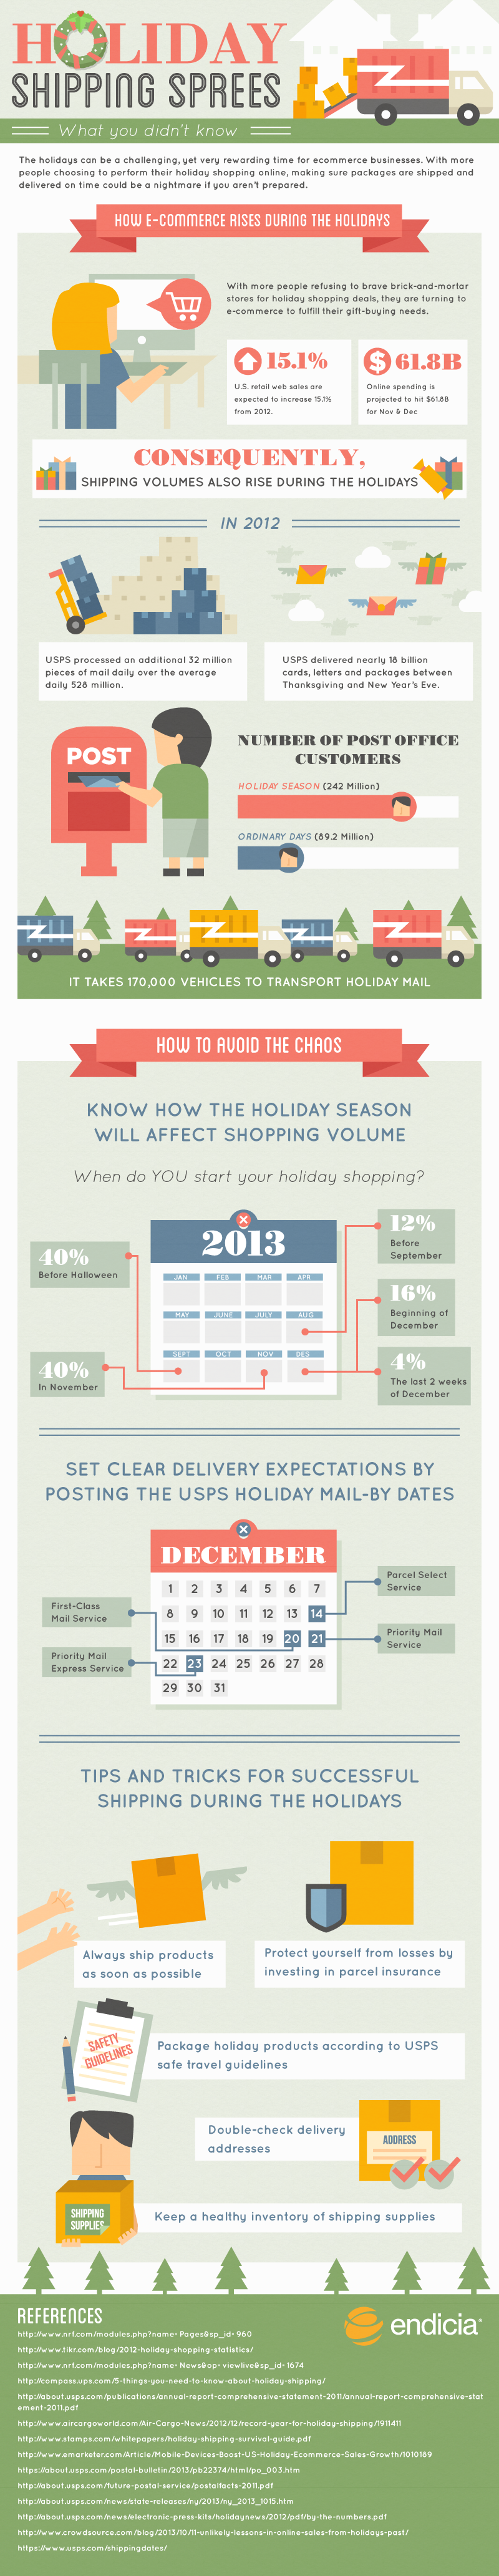 2013 Holiday Shipping Sprees - What You Didn't Know [Infographic ...